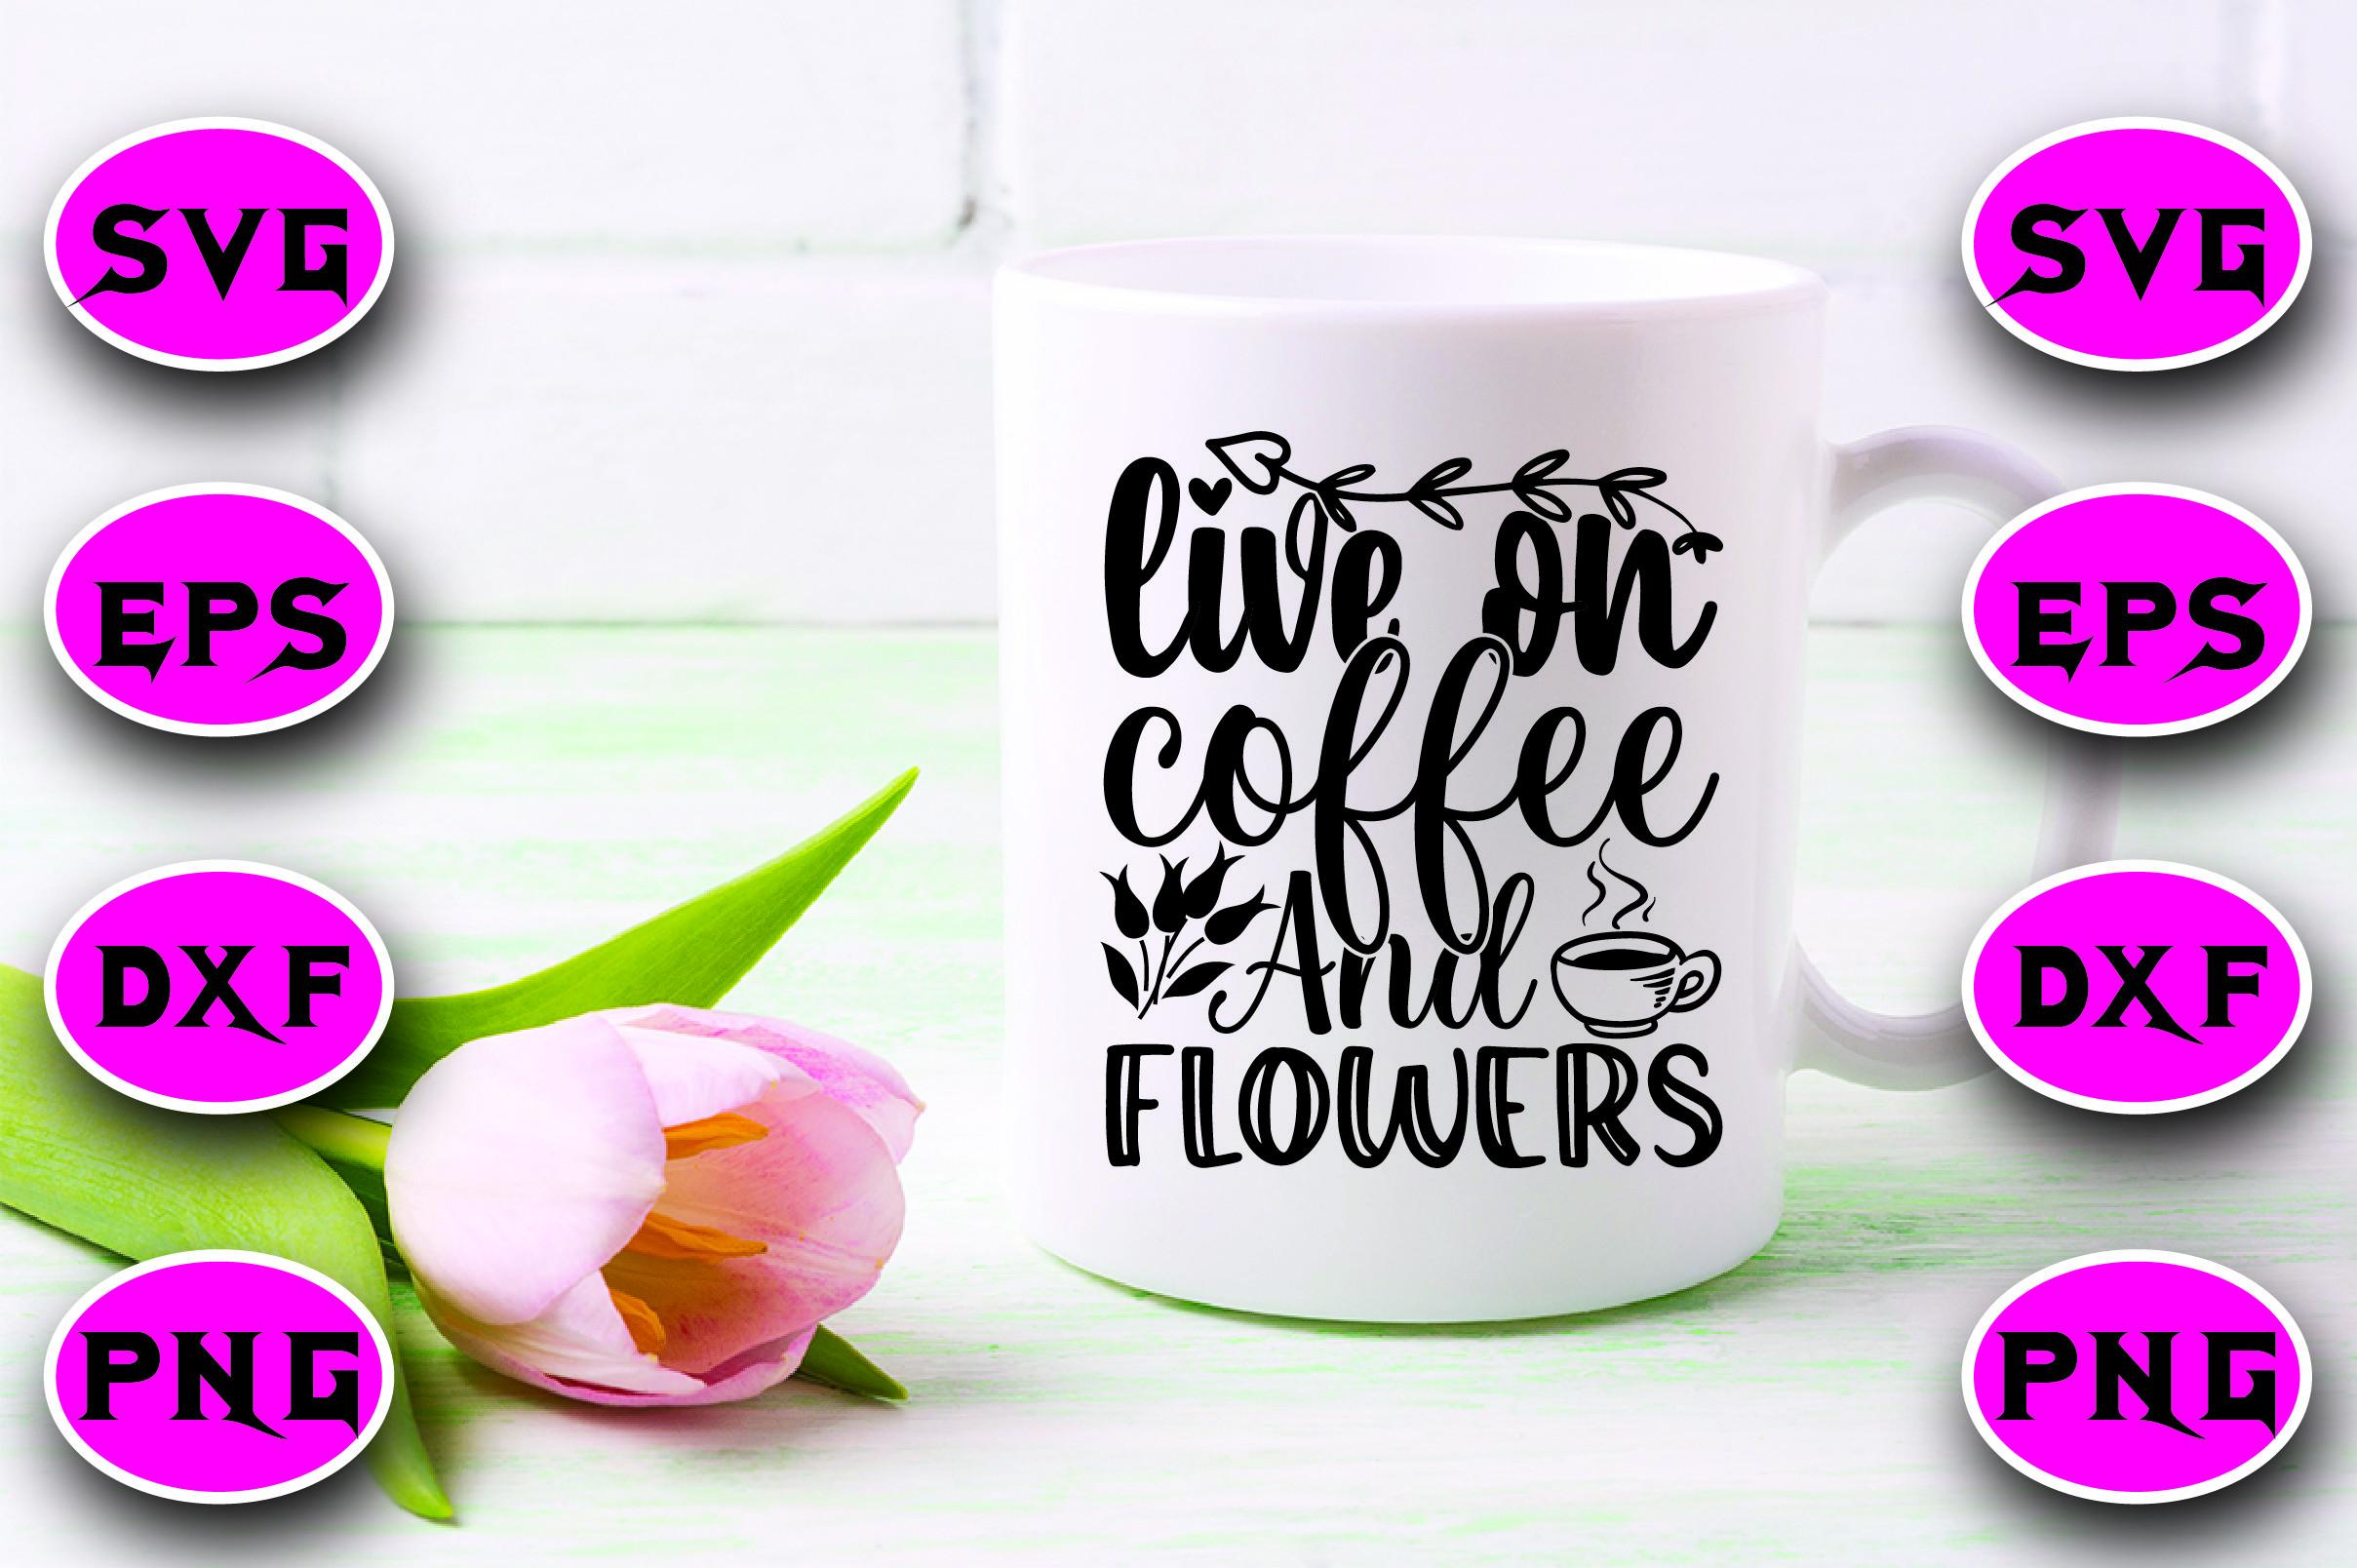 Live on Coffee and Flowers